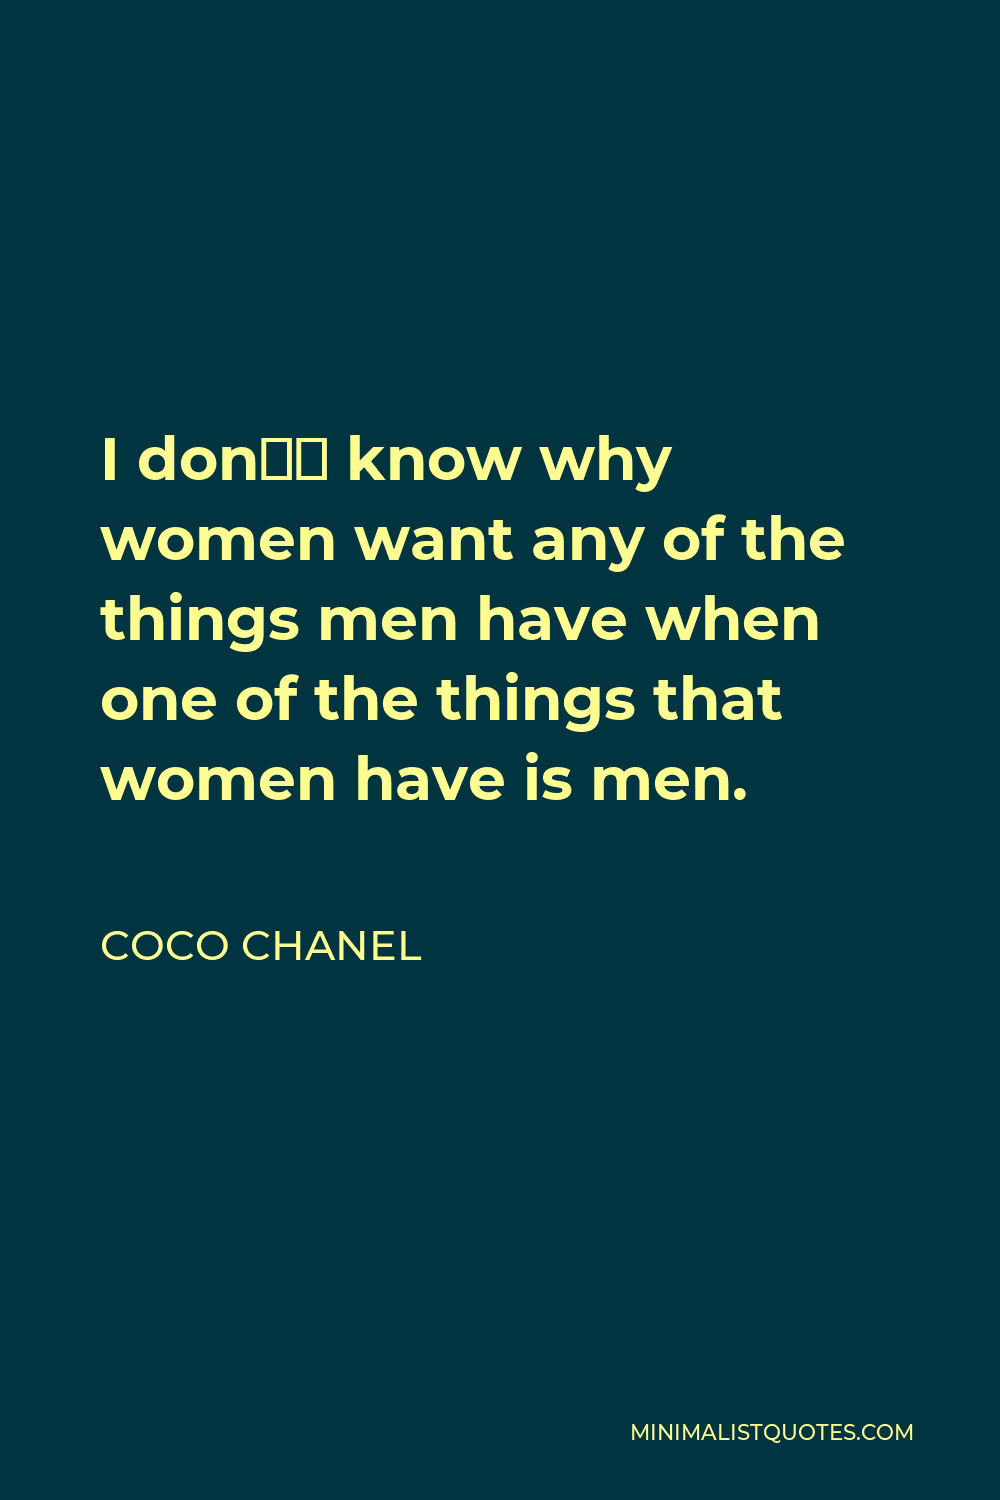 Coco Chanel Quote - I don’t know why women want any of the things men have when one of the things that women have is men.